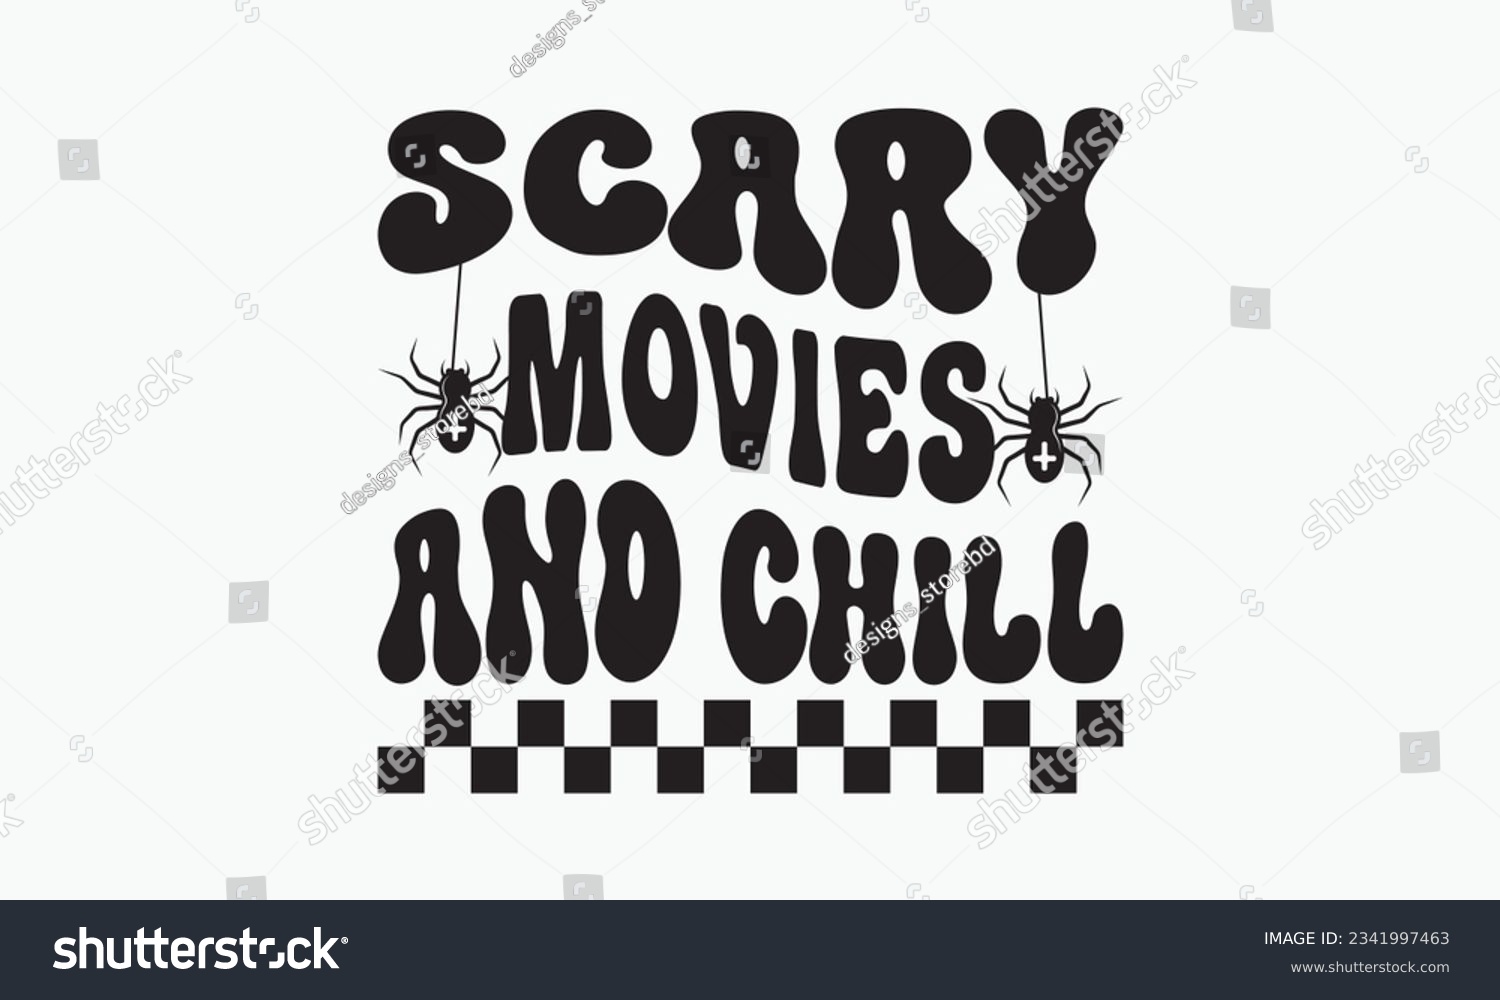 SVG of Scary movies and chill svg, halloween svg design bundle, halloween svg, happy halloween vector, pumpkin, witch, spooky, ghost, funny halloween t-shirt quotes Bundle, Cut File Cricut, Silhouette  svg